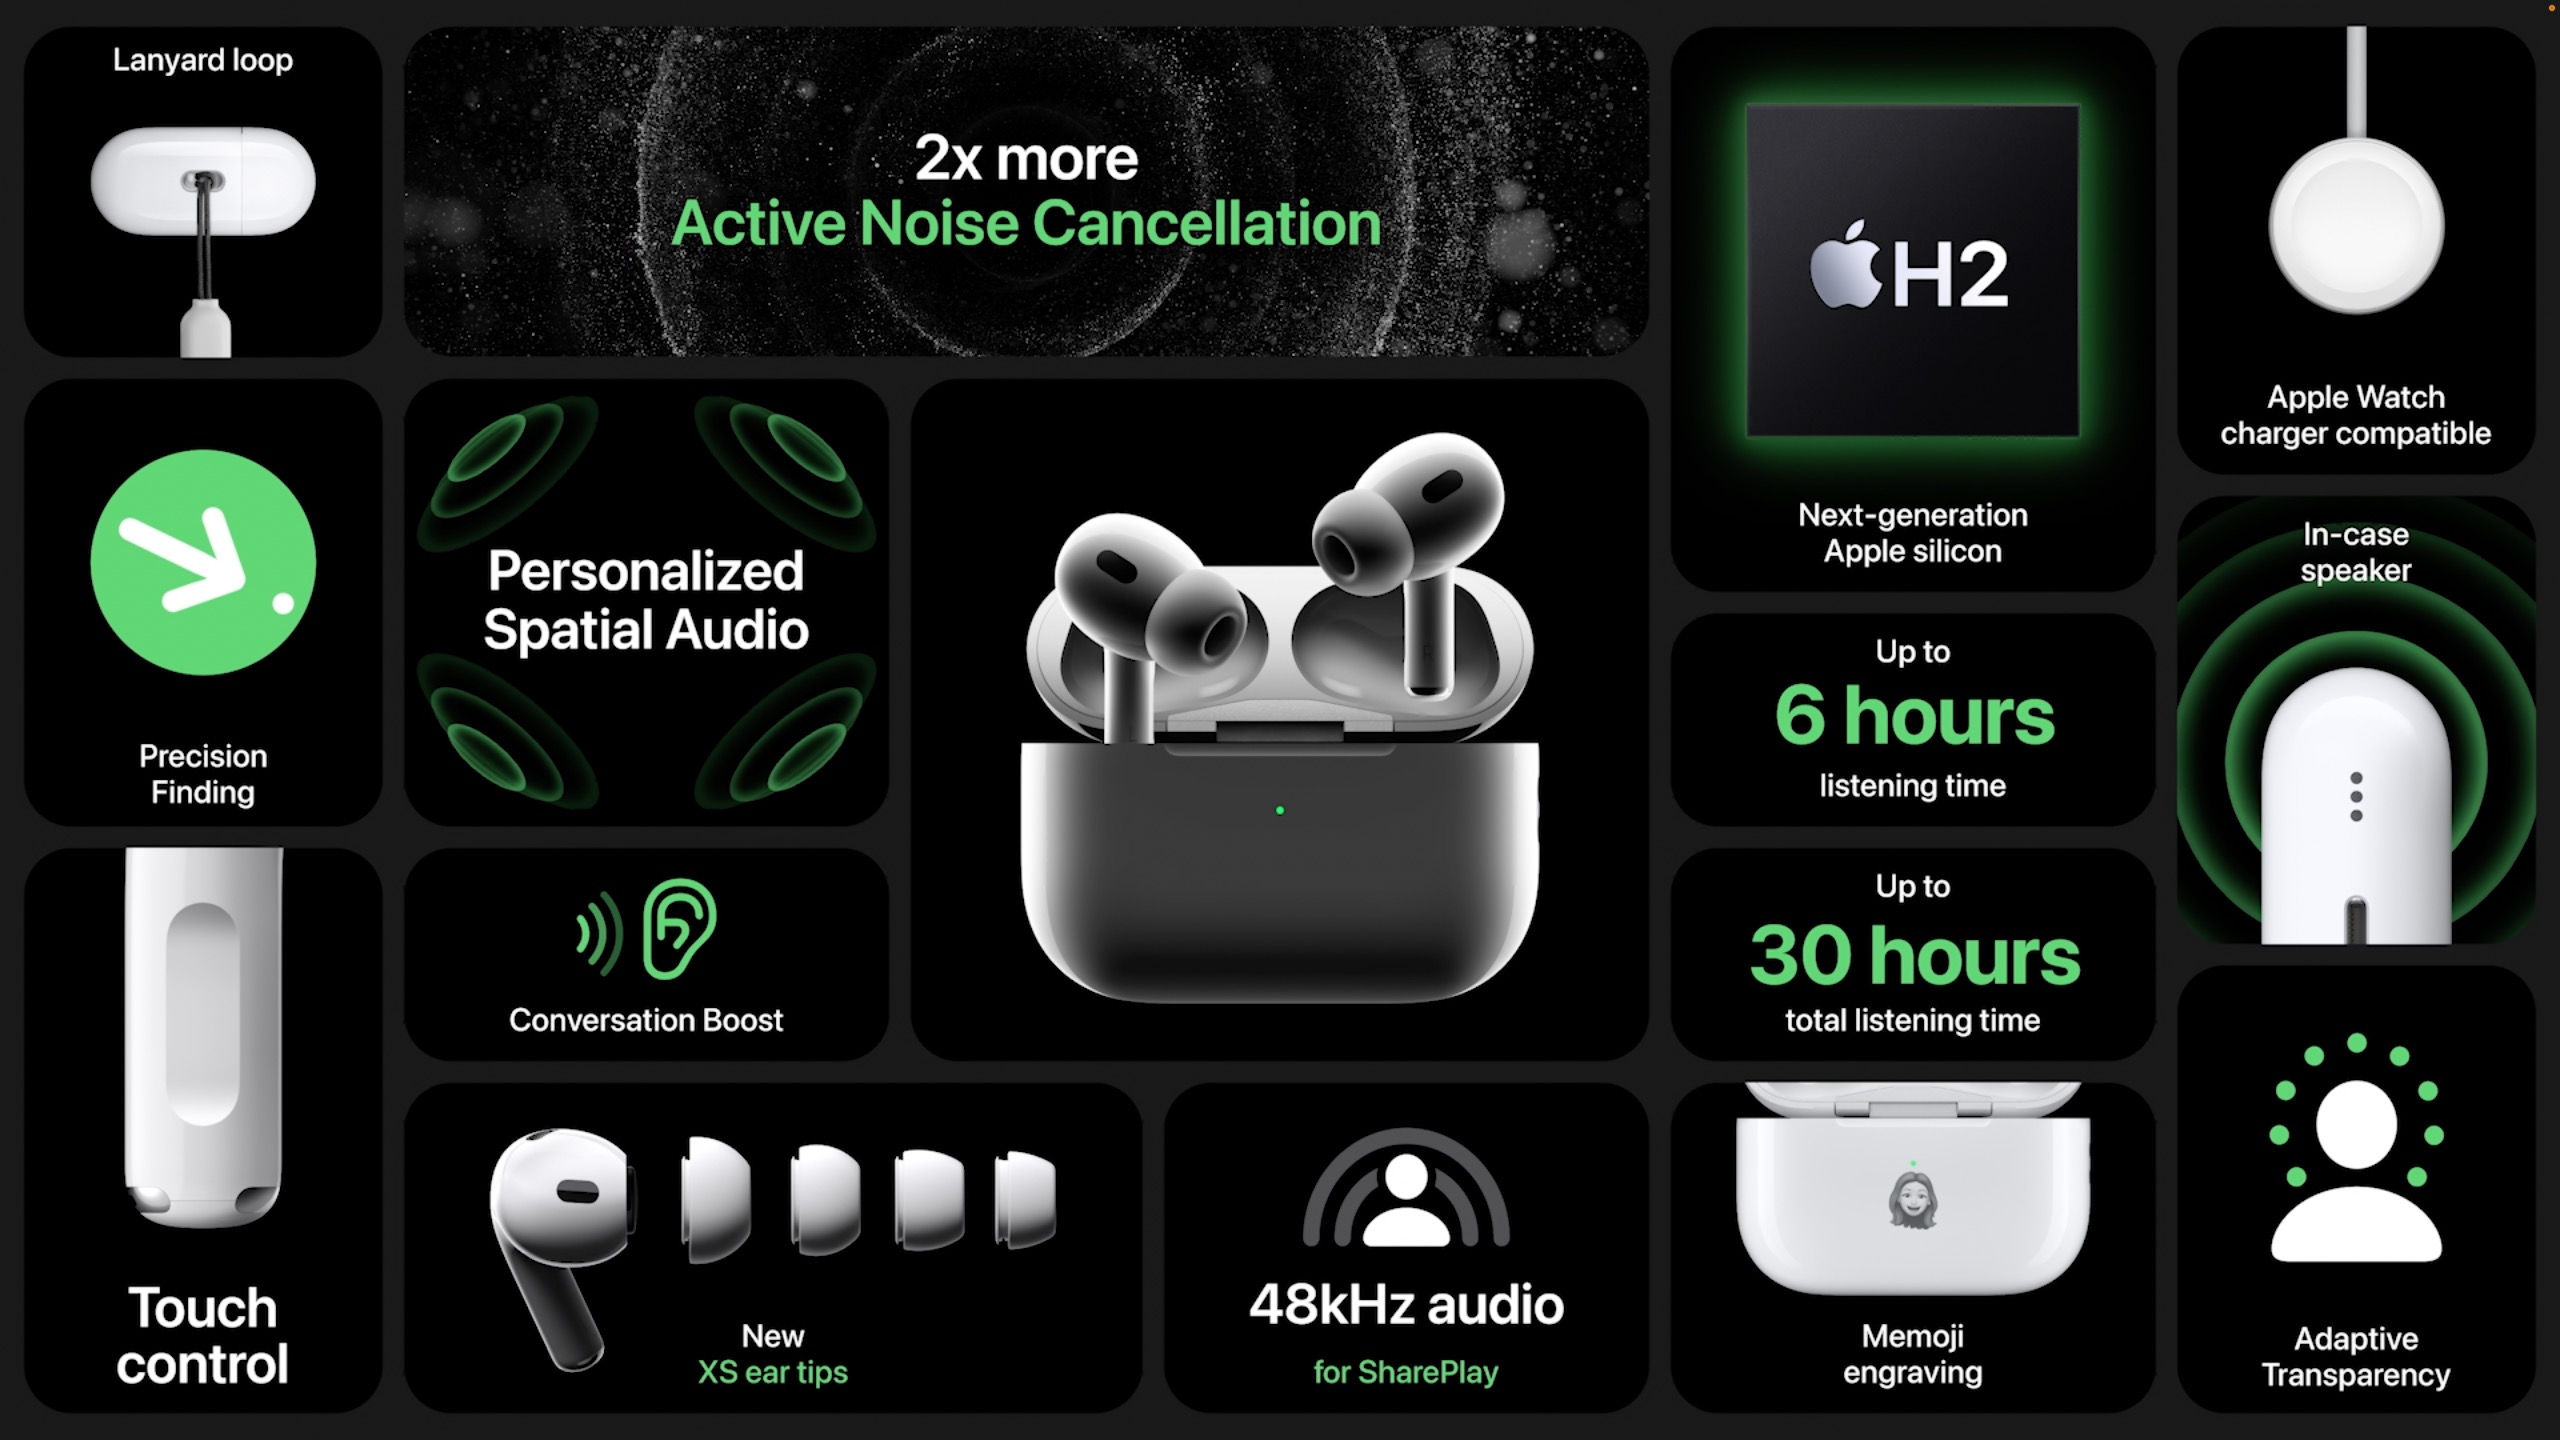 Second-Generation AirPods Pro Add H2 Chip, Control, Enhanced Case - TidBITS